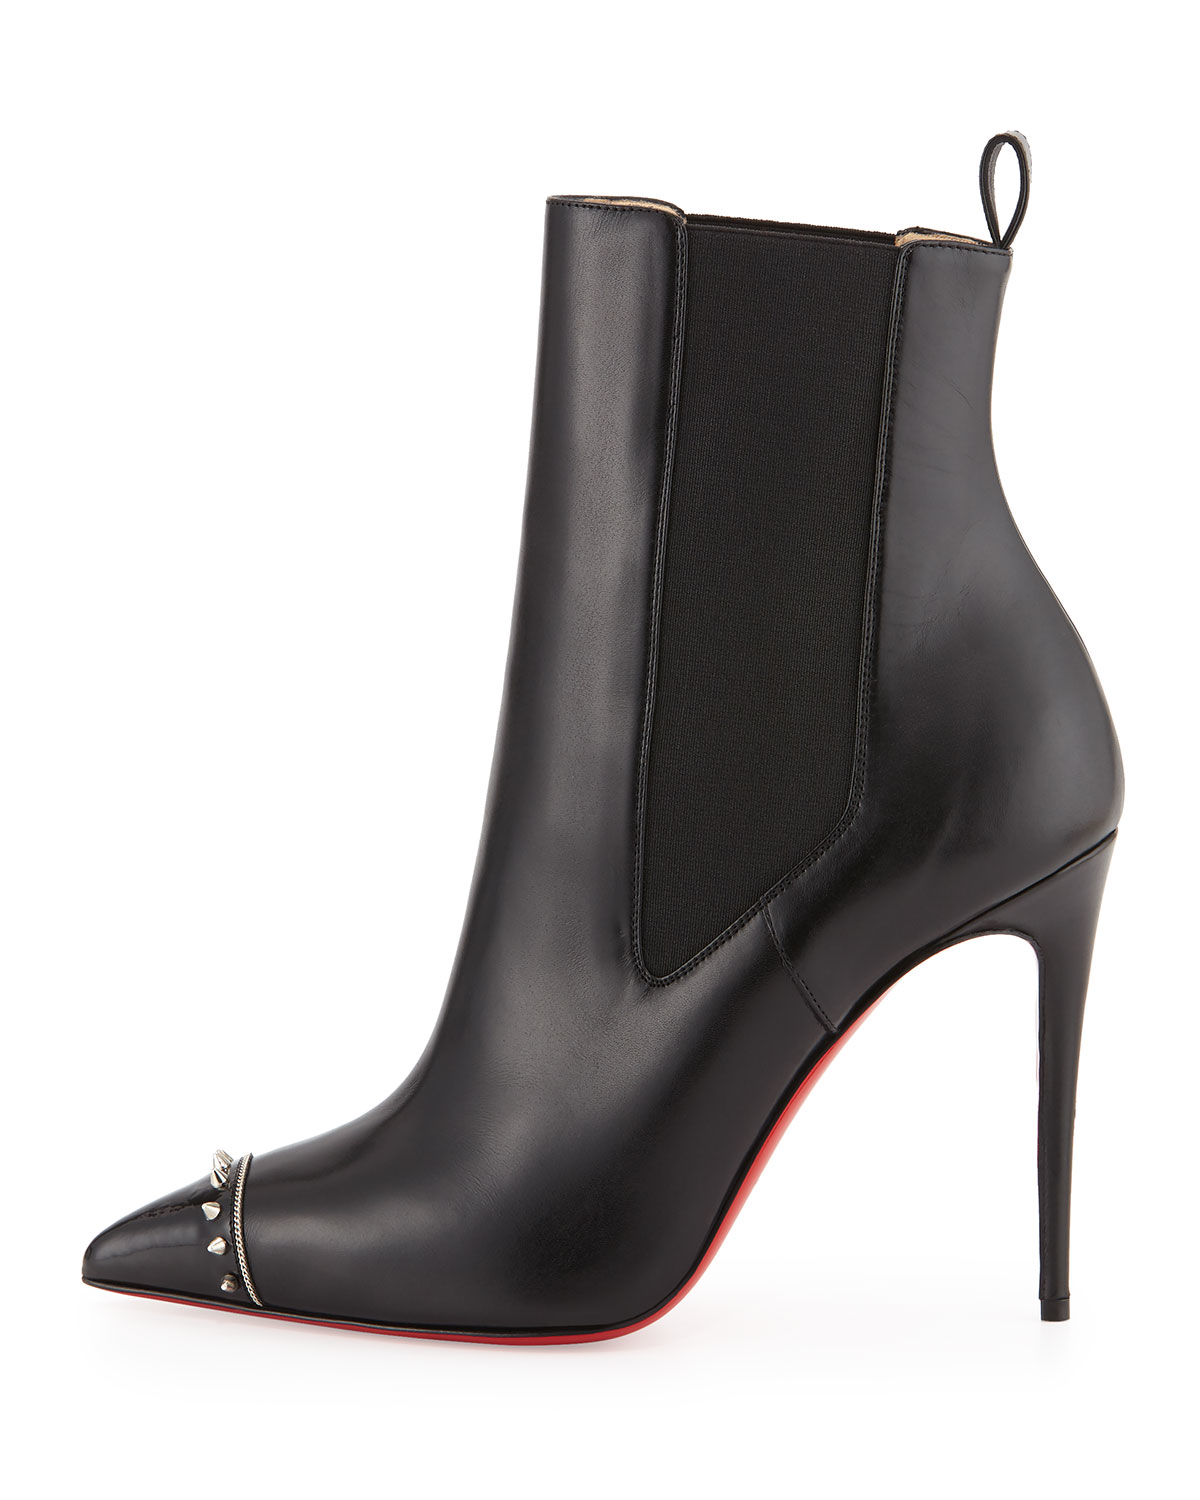 Lyst - Christian Louboutin Banjo Spiked Leather Boots in Black